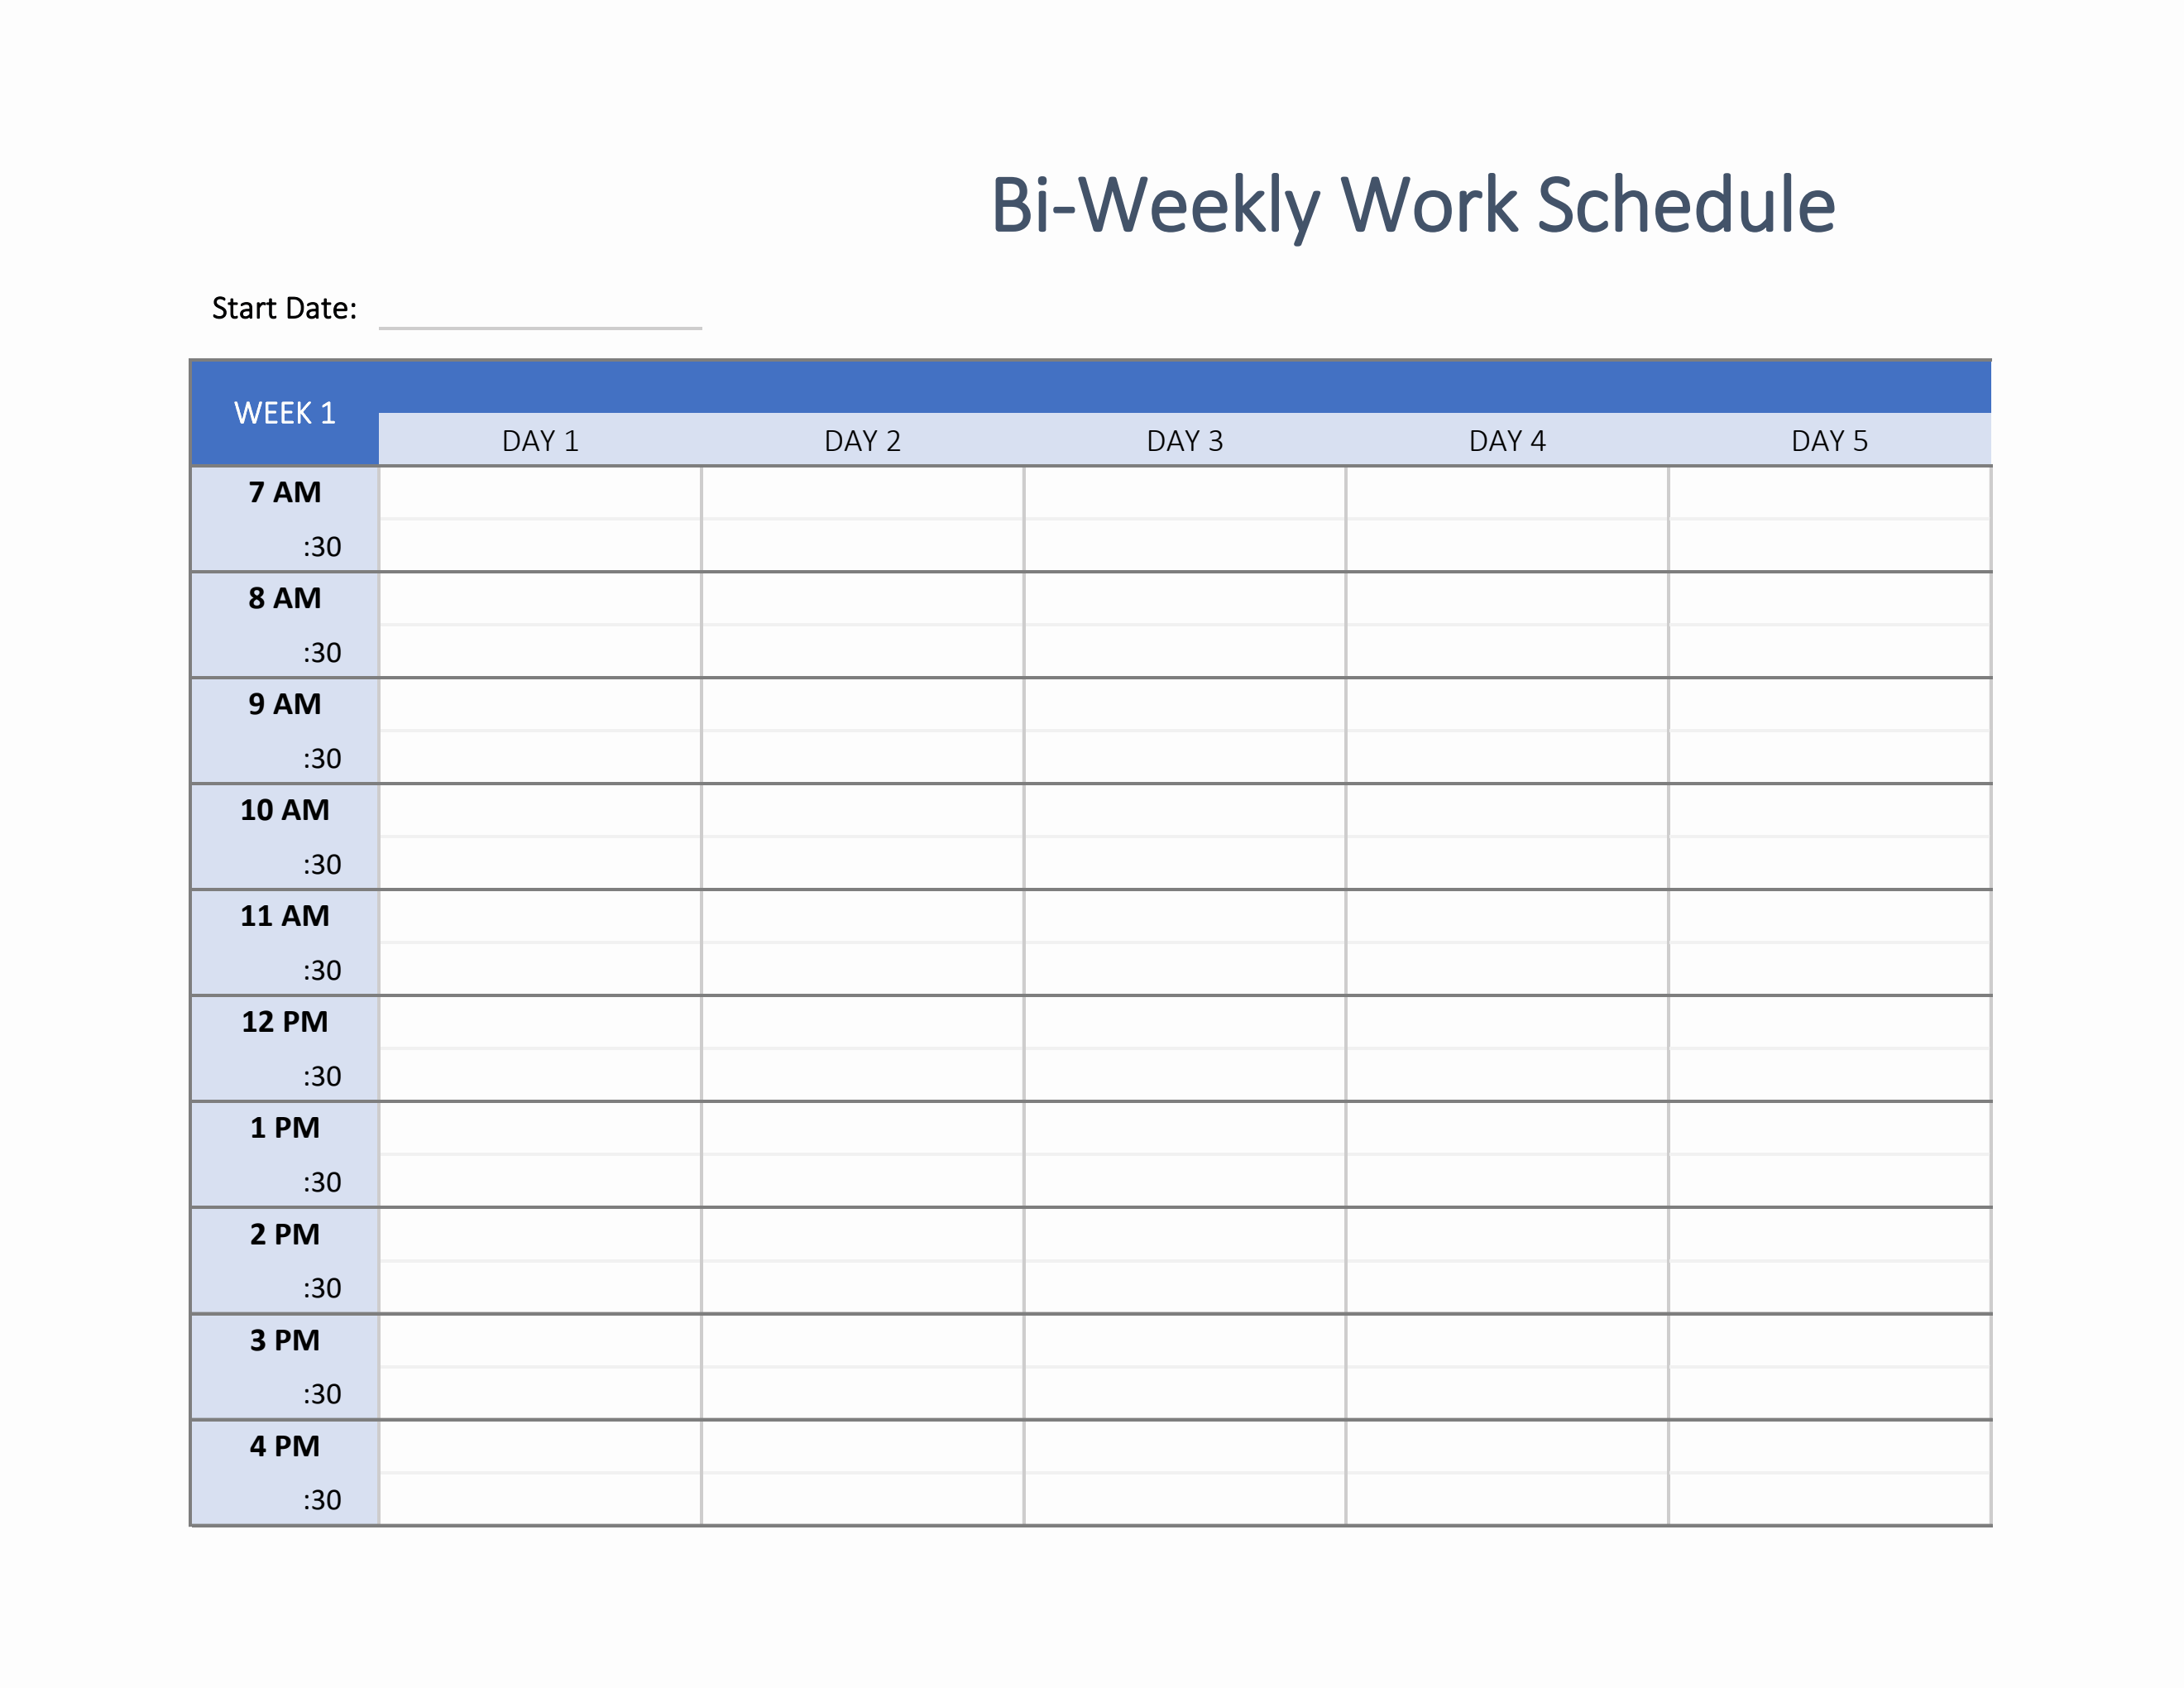 excel template shift schedule